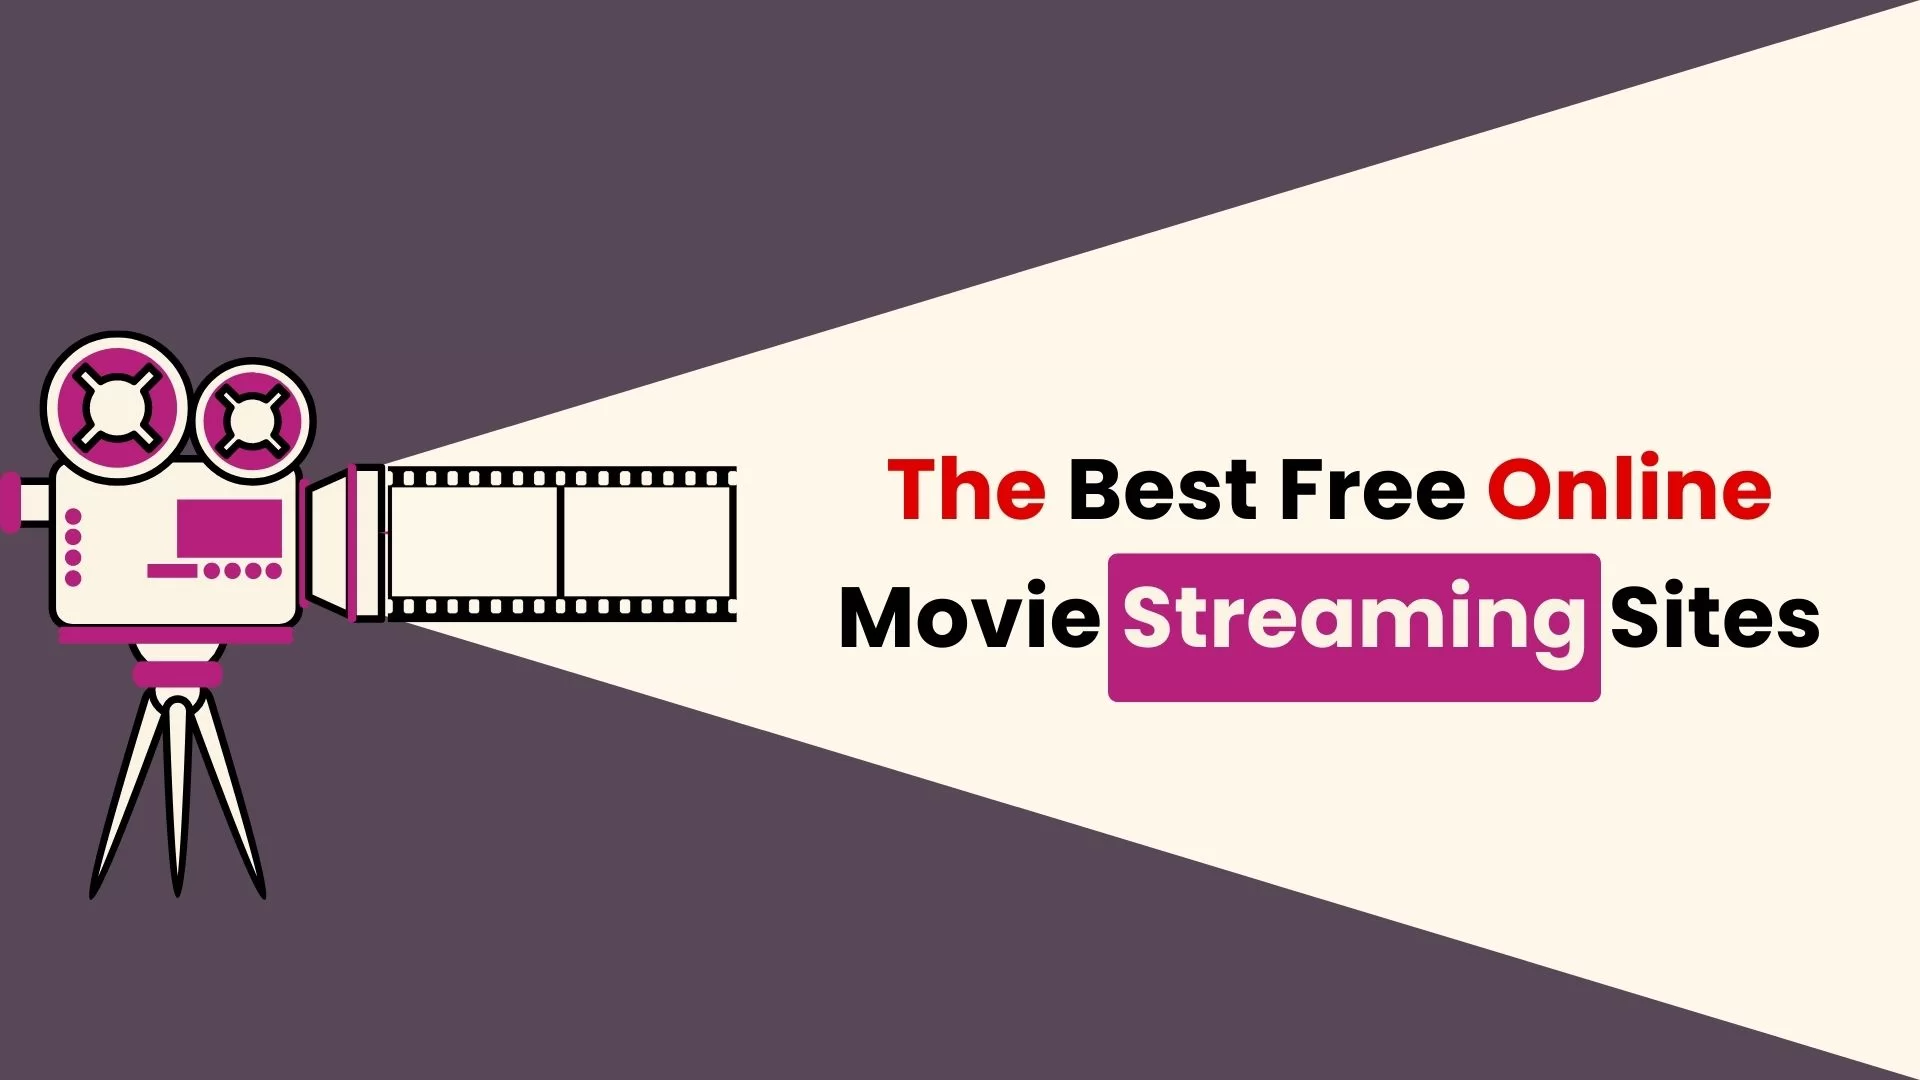 The Topmost Best Free Movie Streaming Sites List